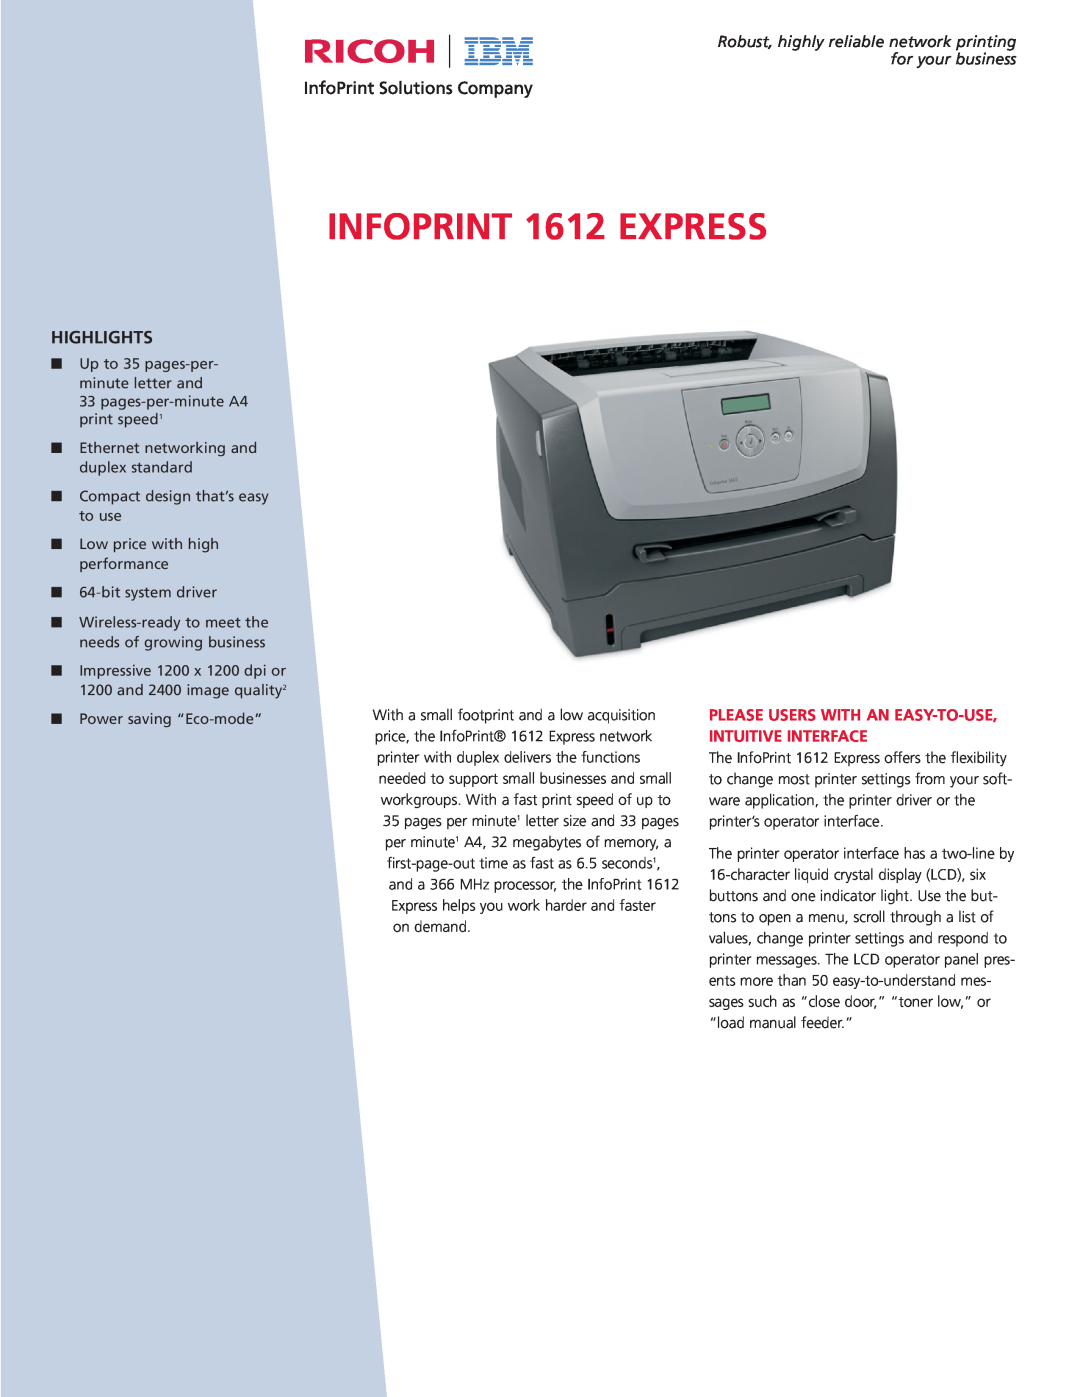 IBM Ricoh manual Please Users With An Easy-To-Use, Intuitive Interface, INFOPRINT 1612 EXPRESS, Highlights 